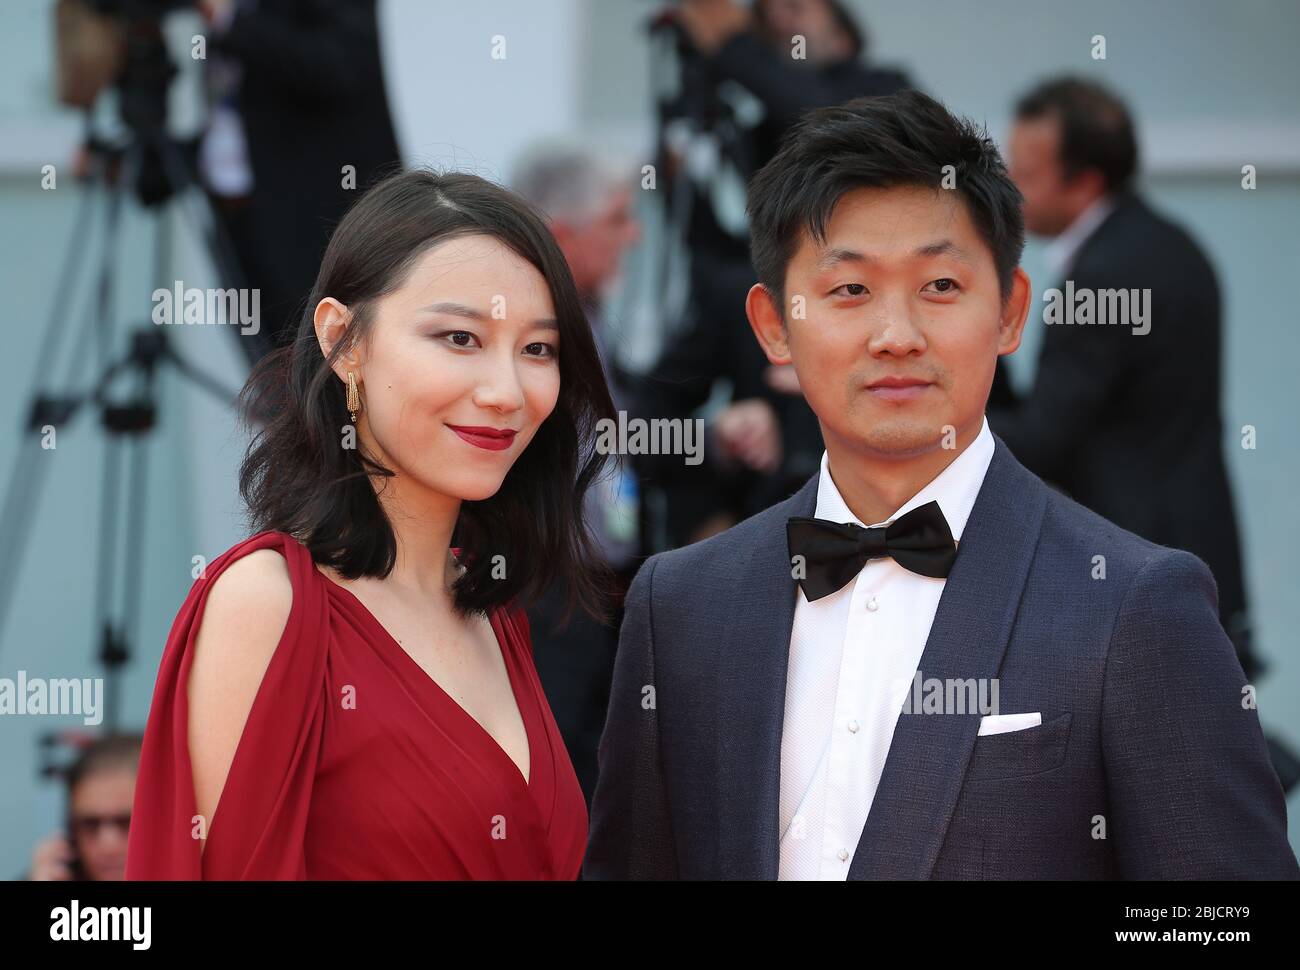 VENICE, ITALY - SEPTEMBER 09: (L-R) Ying Zei and Pengfei walks the red carpet ahead the Award Ceremony of the 74th Venice Film Festival Stock Photo